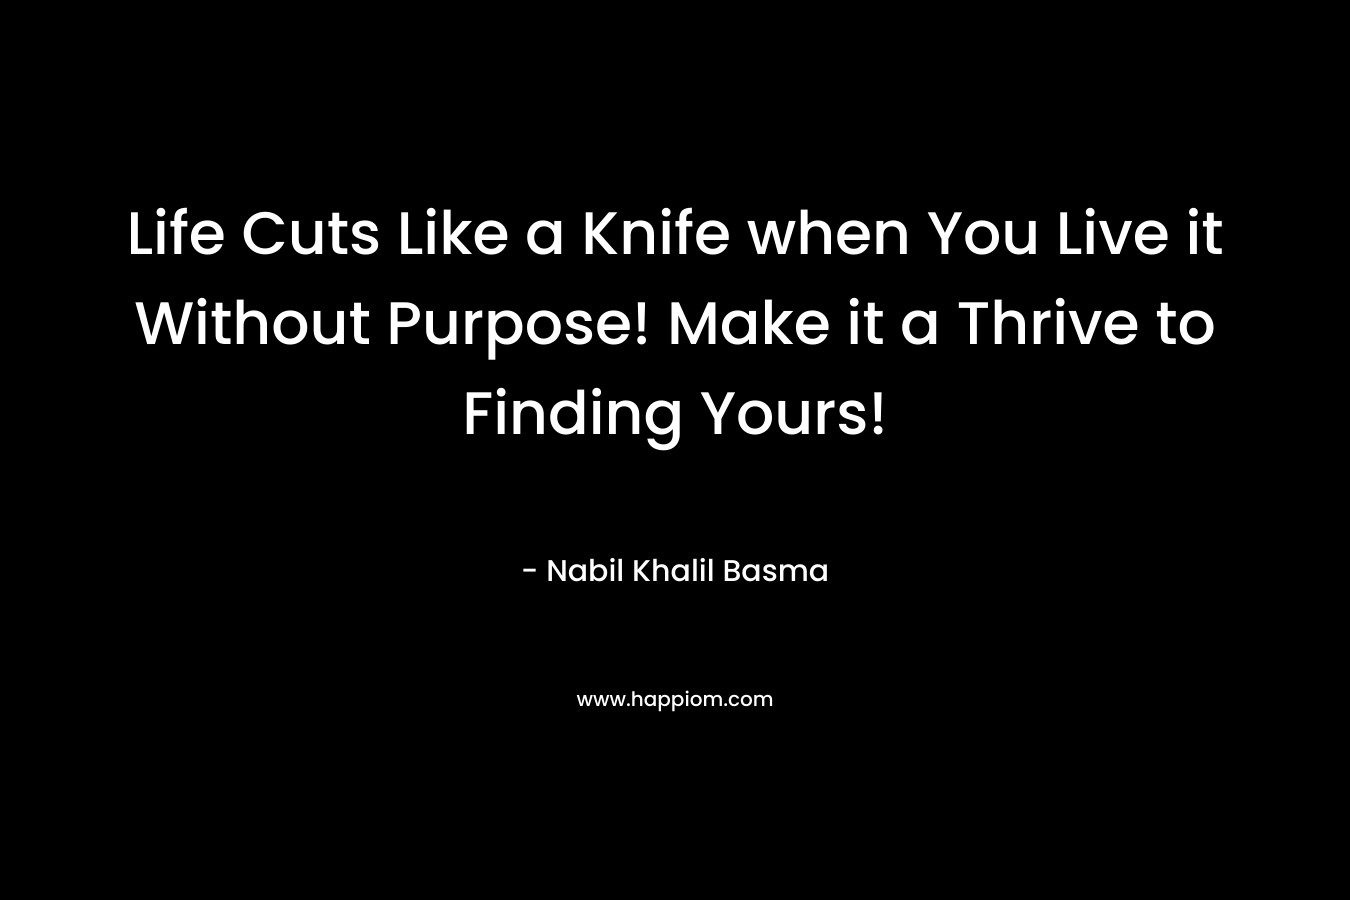 Life Cuts Like a Knife when You Live it Without Purpose! Make it a Thrive to Finding Yours!